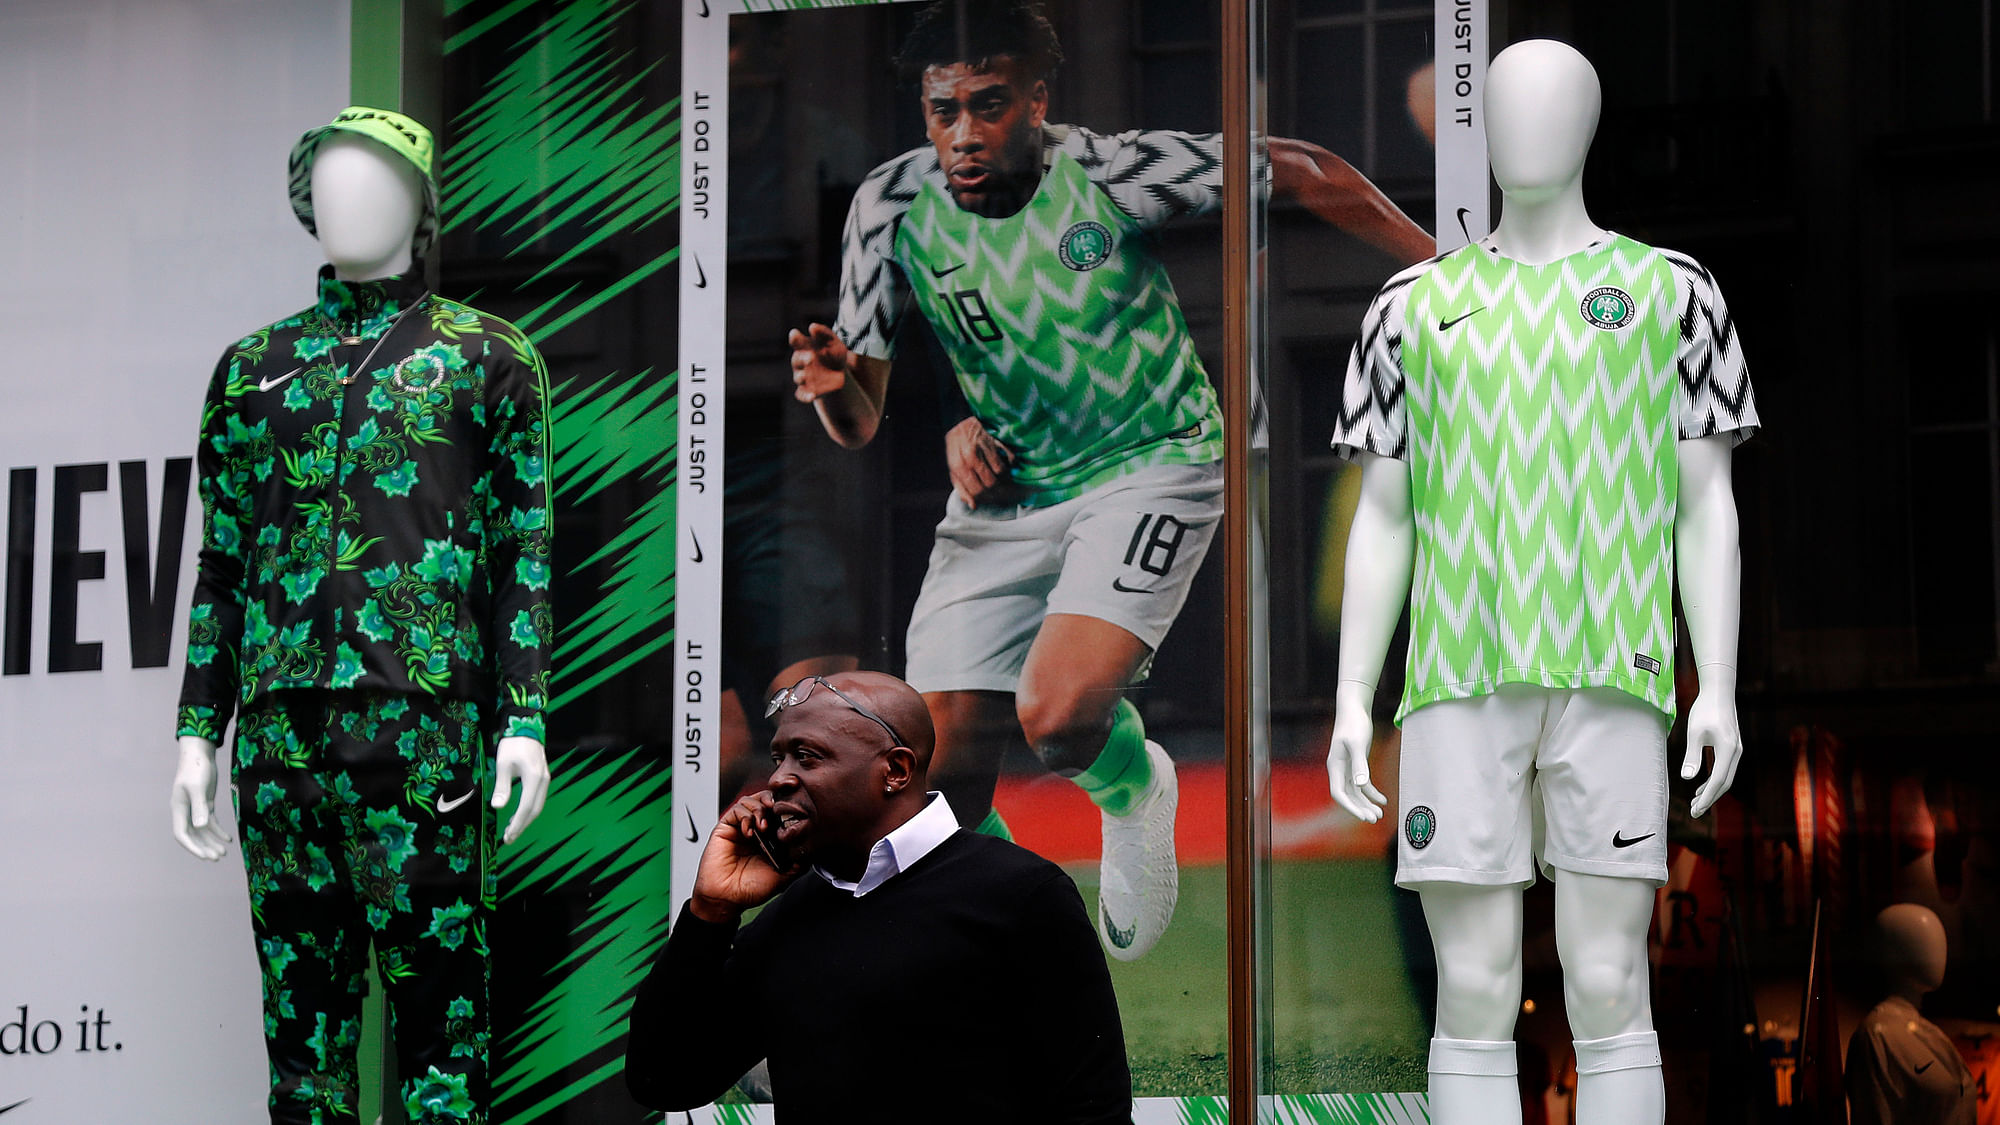 Nigerian national soccer team jersey is on display at a shop in London.&nbsp;